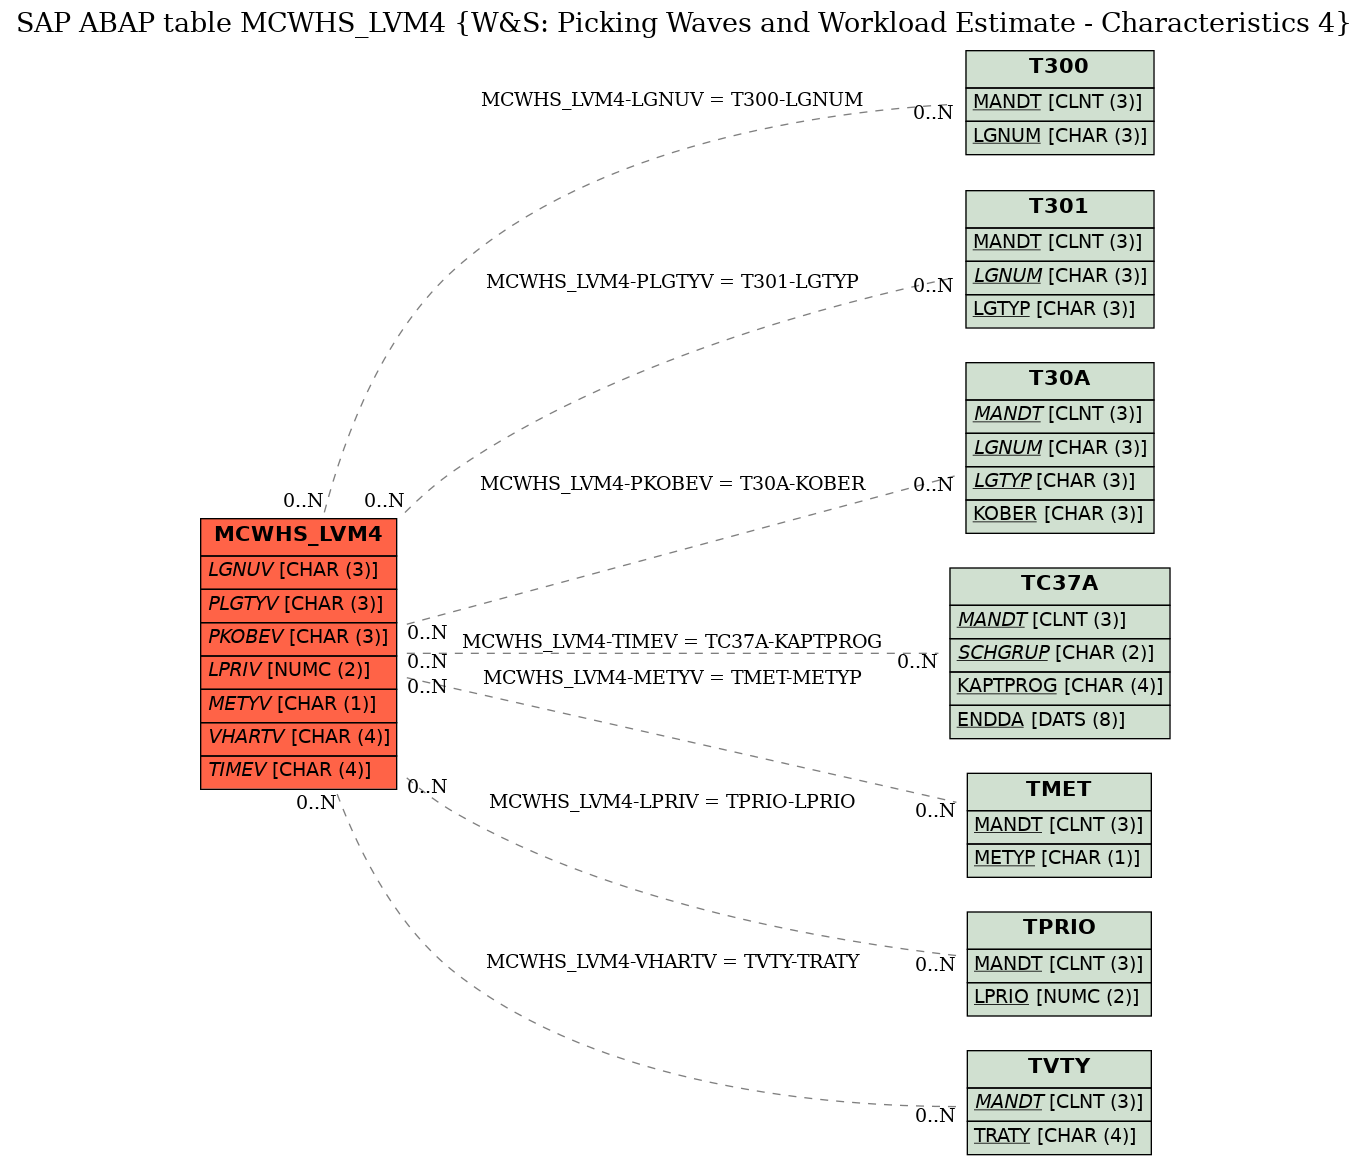 E-R Diagram for table MCWHS_LVM4 (W&S: Picking Waves and Workload Estimate - Characteristics 4)